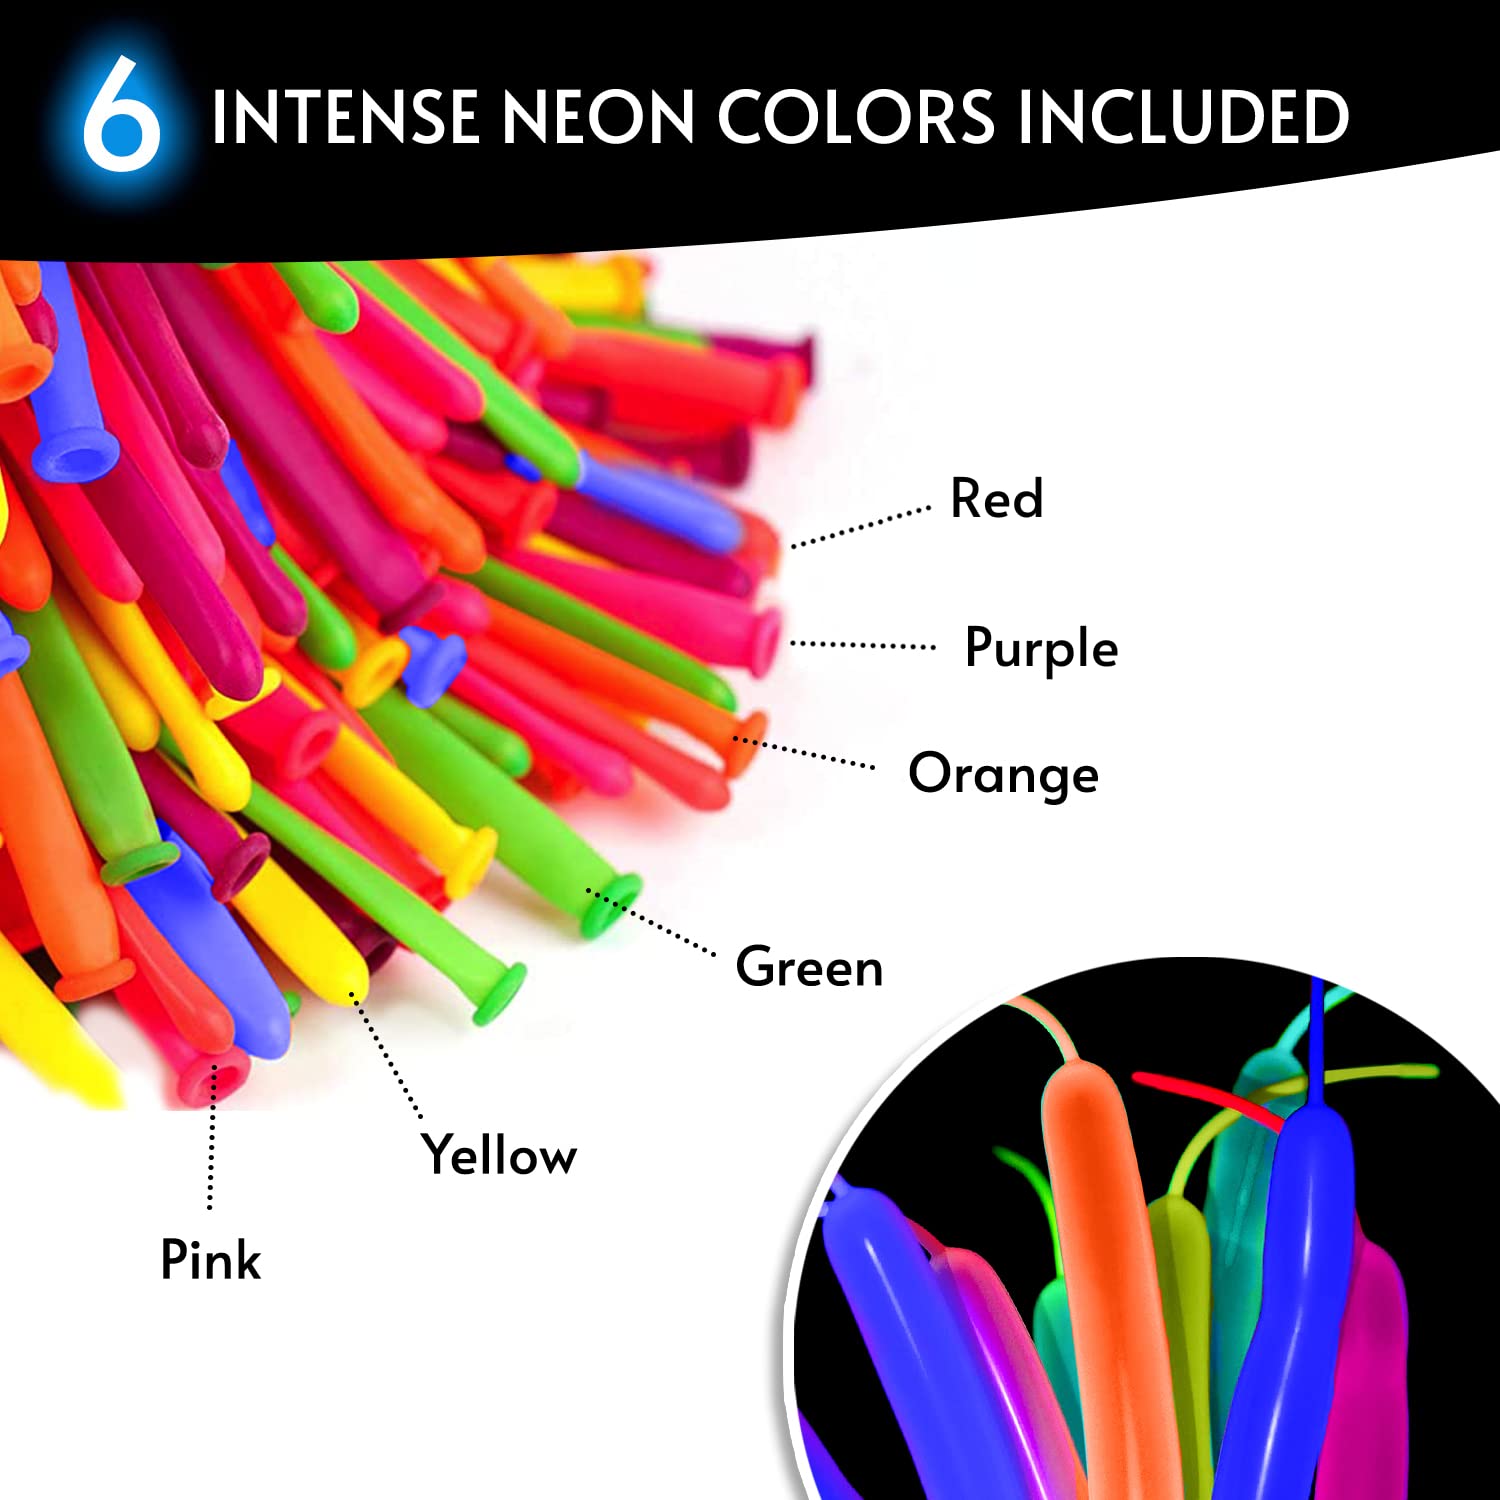 Glow King Black Light Reactive Neon Long Balloons | Glow In The Dark Tying Balloons in Assorted Colors | Fun UV Fluorescent Party Gifts | Luminous Animal Ballons for Birthday Decoration – 100 Pack